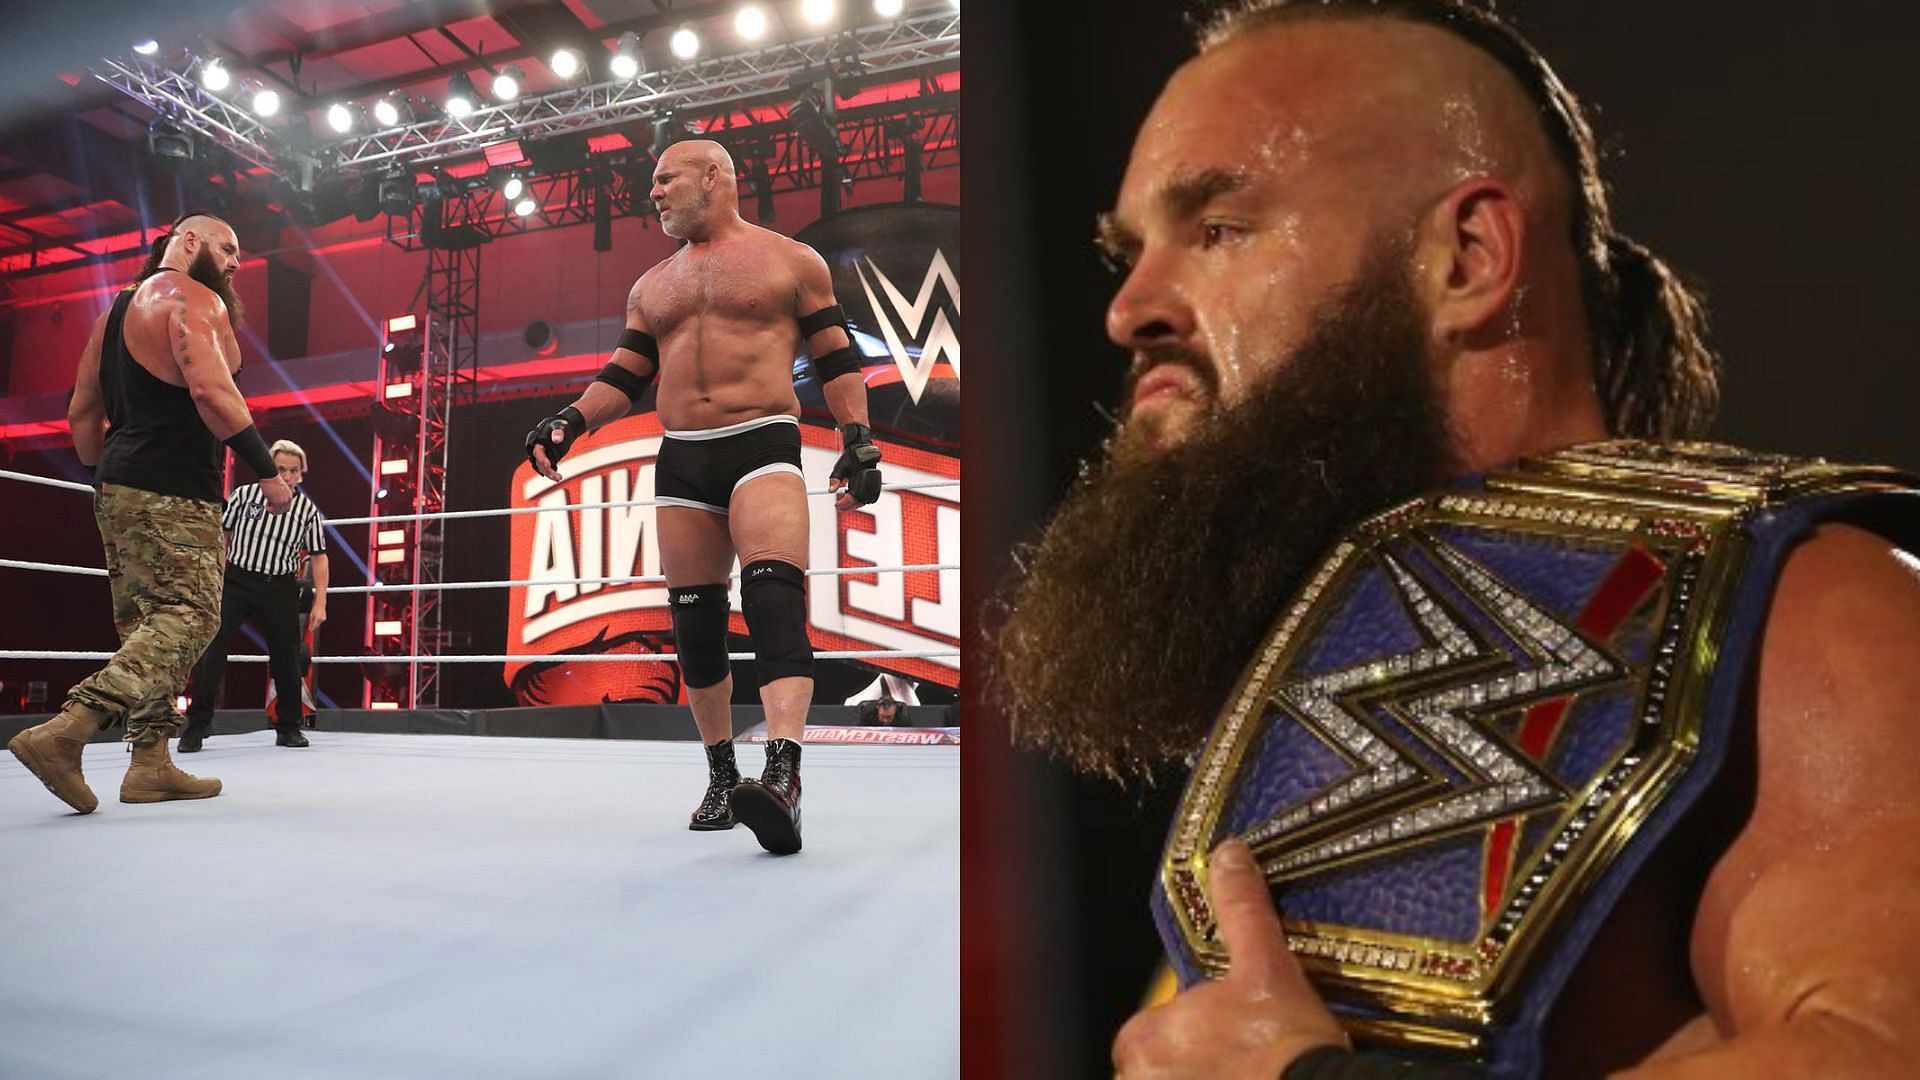 Braun Strowman won his first and only world championship filling in as a replacement